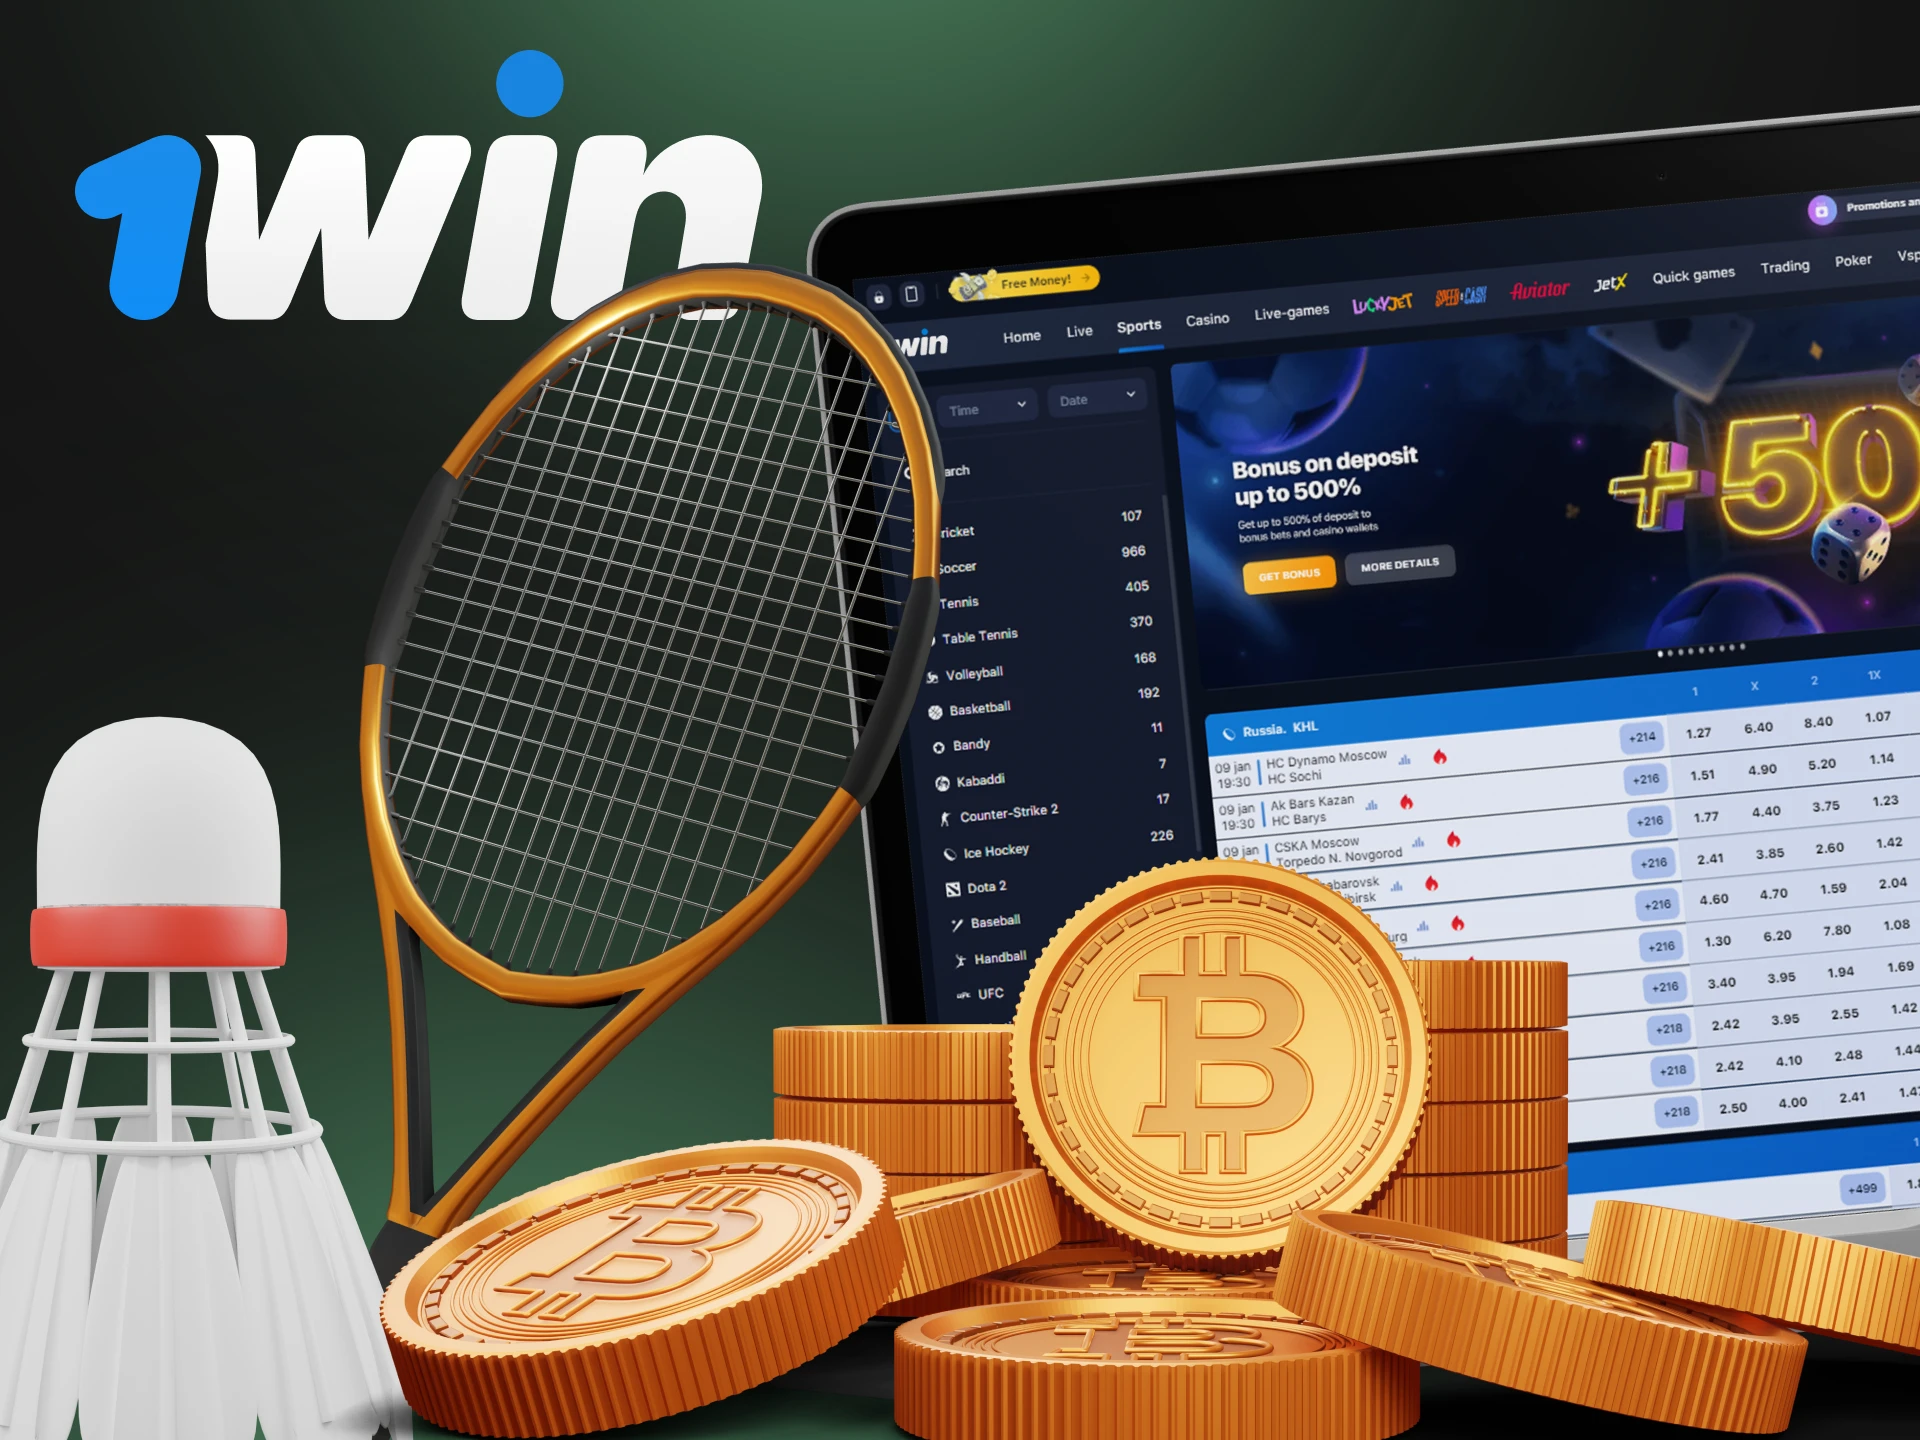 Bookmaker 1win accepts cryptocurrency for sports betting.